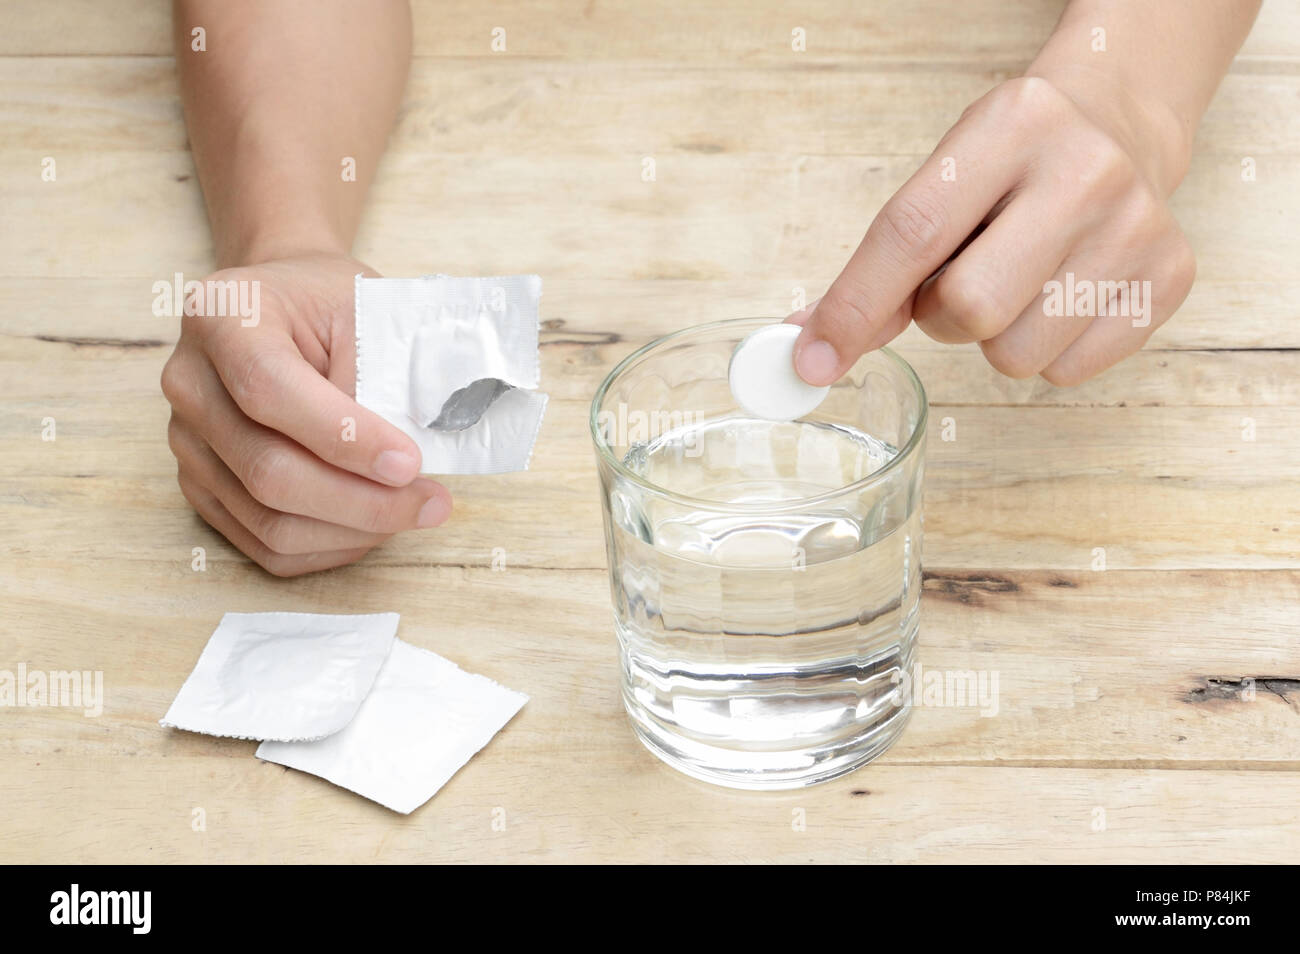 woman hand dropping effervescent tablet in a glass of water on wooden table Stock Photo